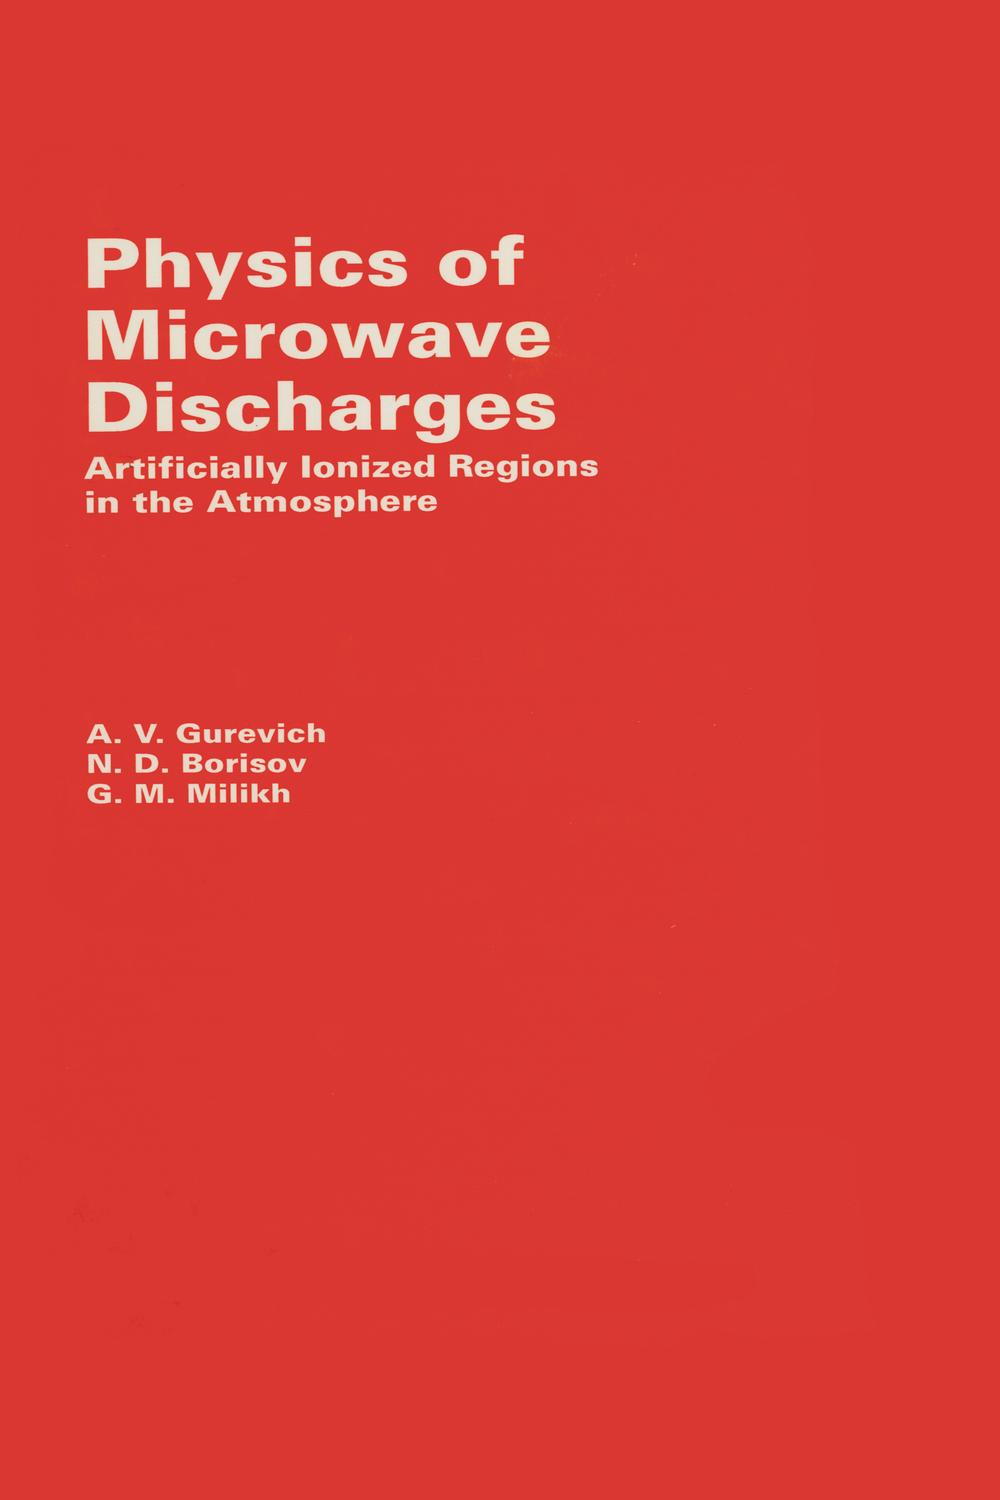 Physics of Microwave Discharges - A Gurevich